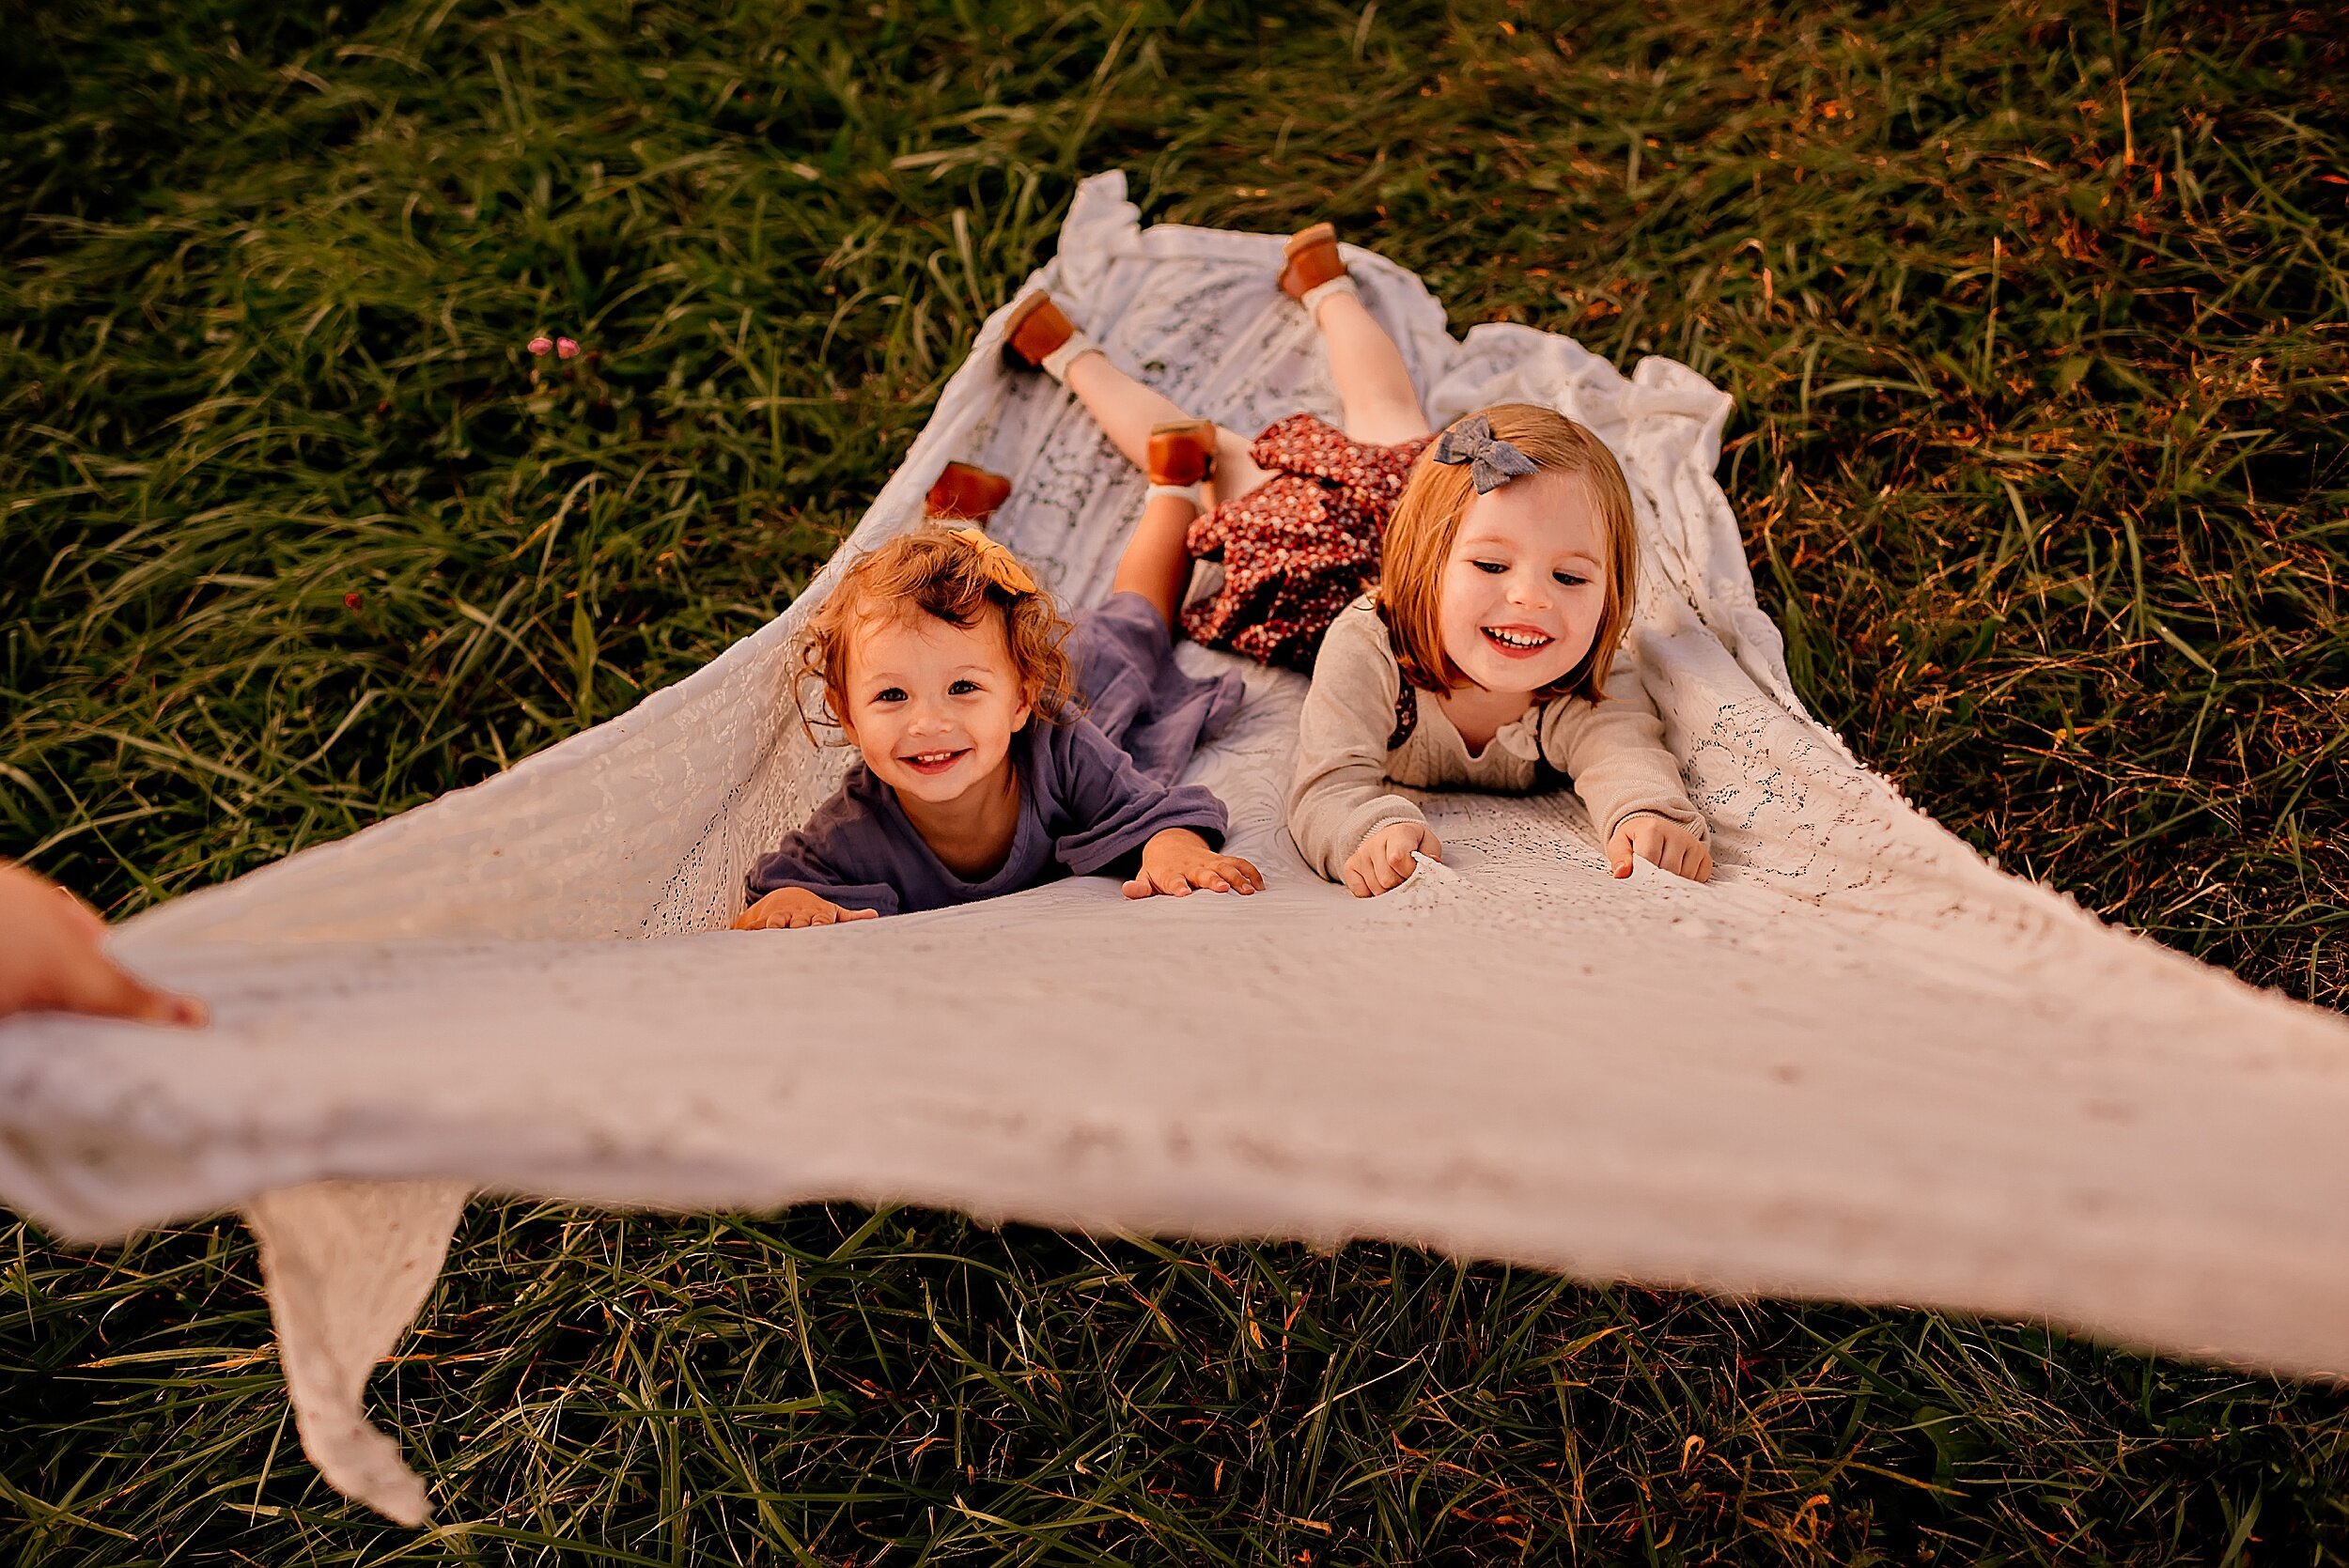 akron-ohio-family-photography-session-summer-sunset-outdoors-with-photographer-lauren-grayson_0307.jpeg